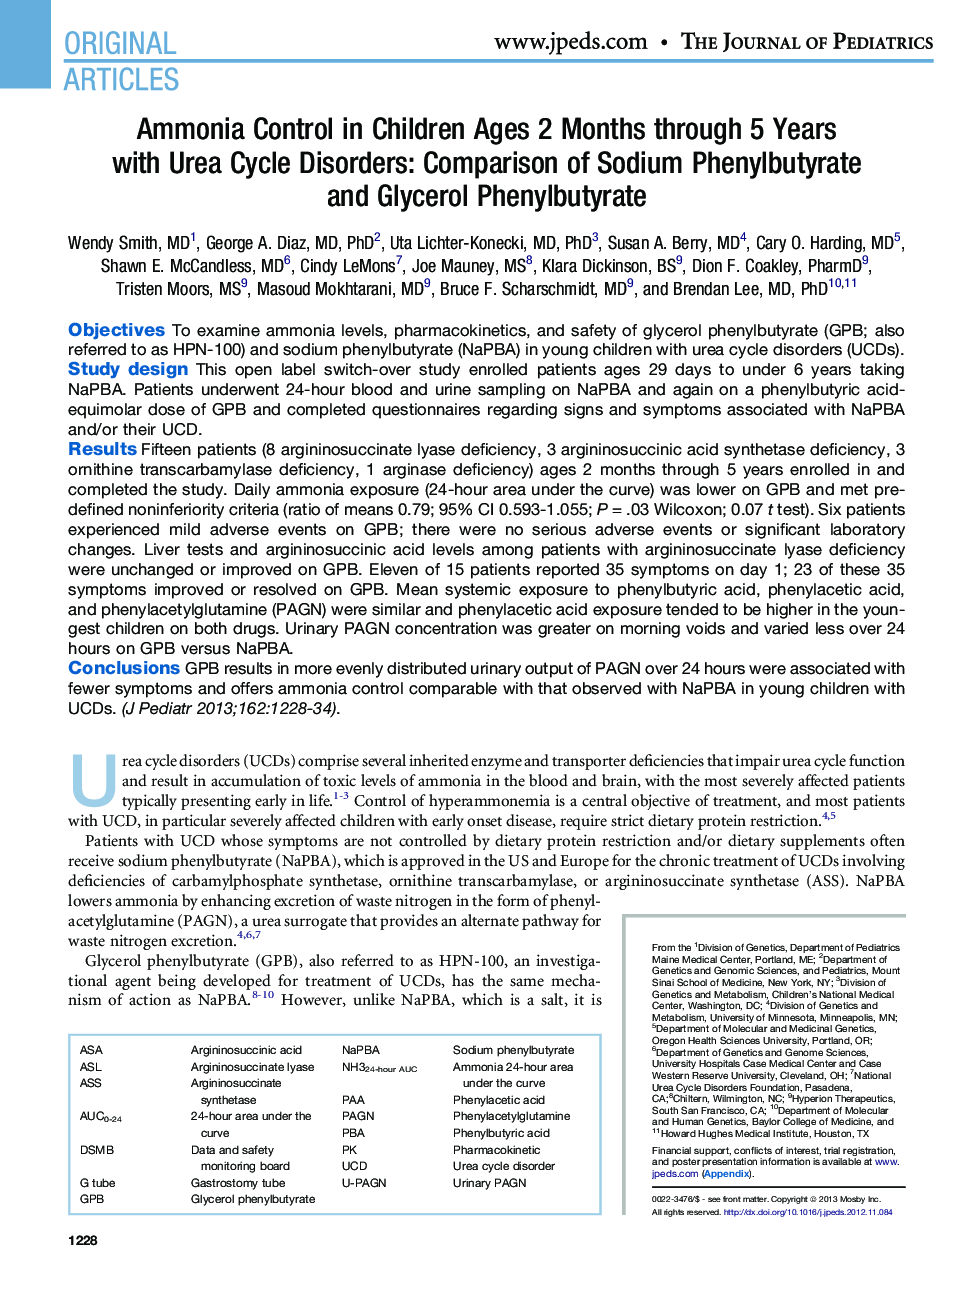 Ammonia Control in Children Ages 2 Months through 5 Years with Urea Cycle Disorders: Comparison of Sodium Phenylbutyrate and Glycerol Phenylbutyrate